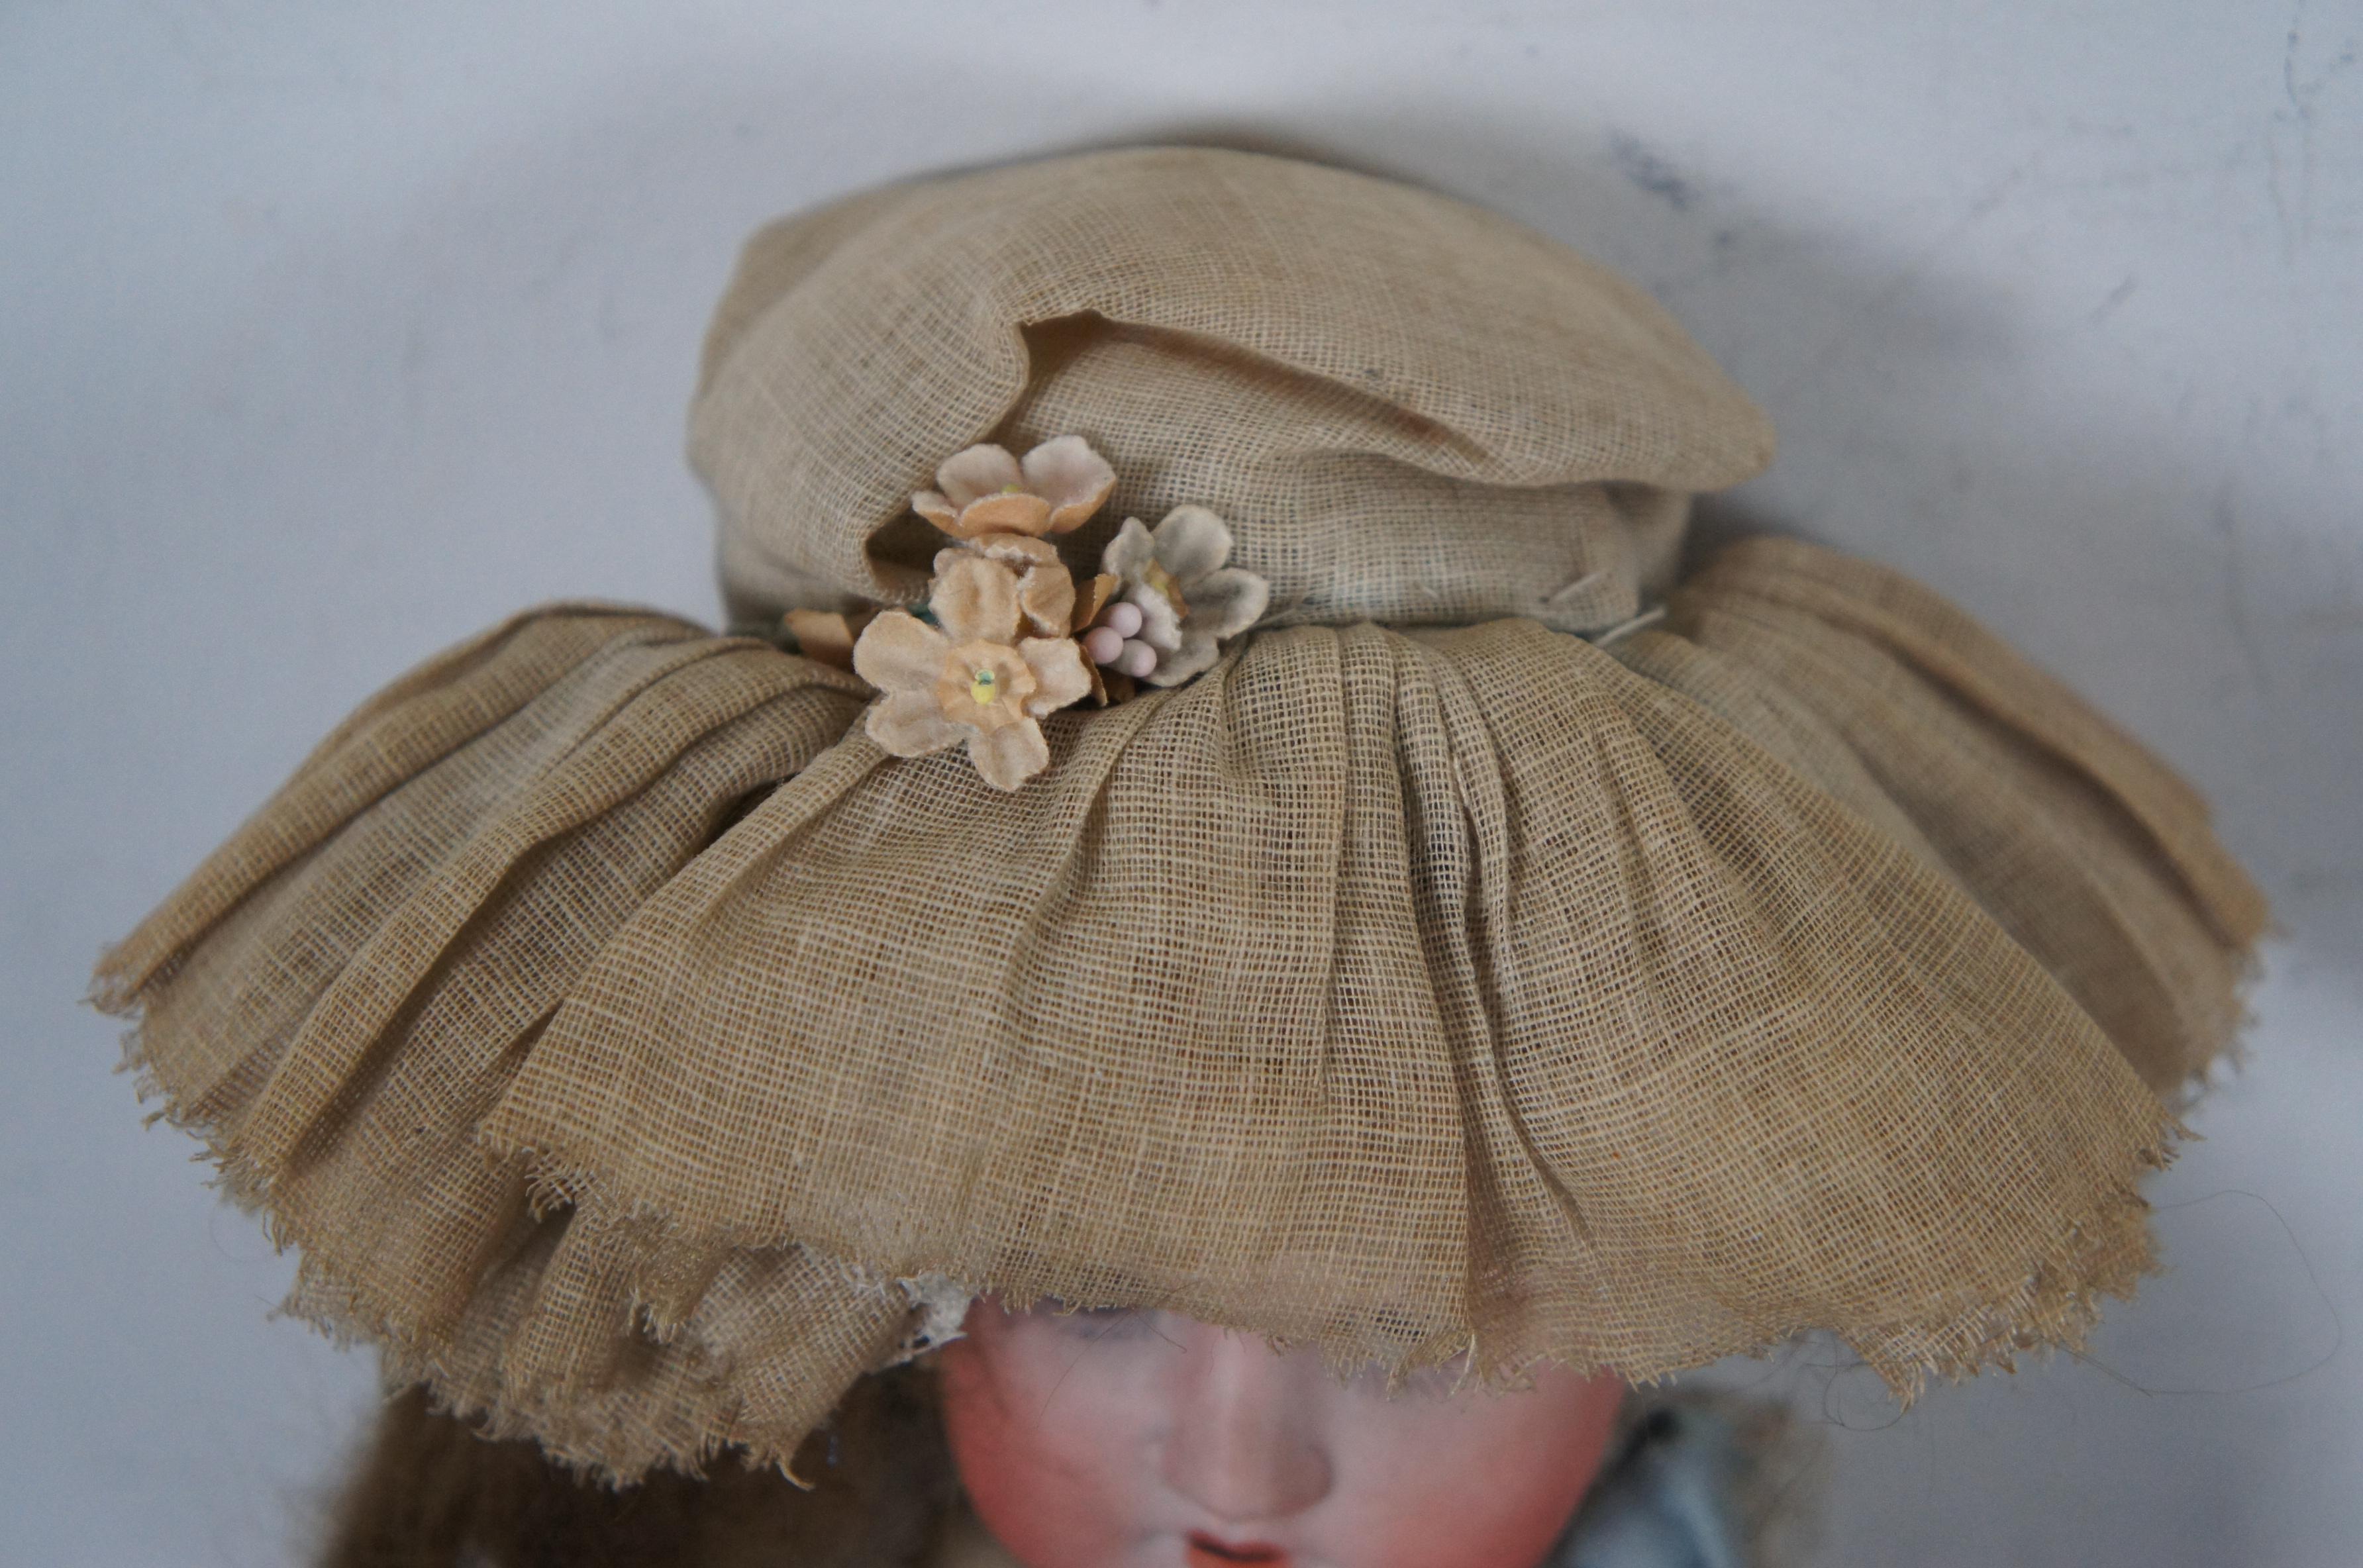 Ceramic Antique 1910s Armand Marseille Bisque Head Wiefel W & Co Character Doll For Sale